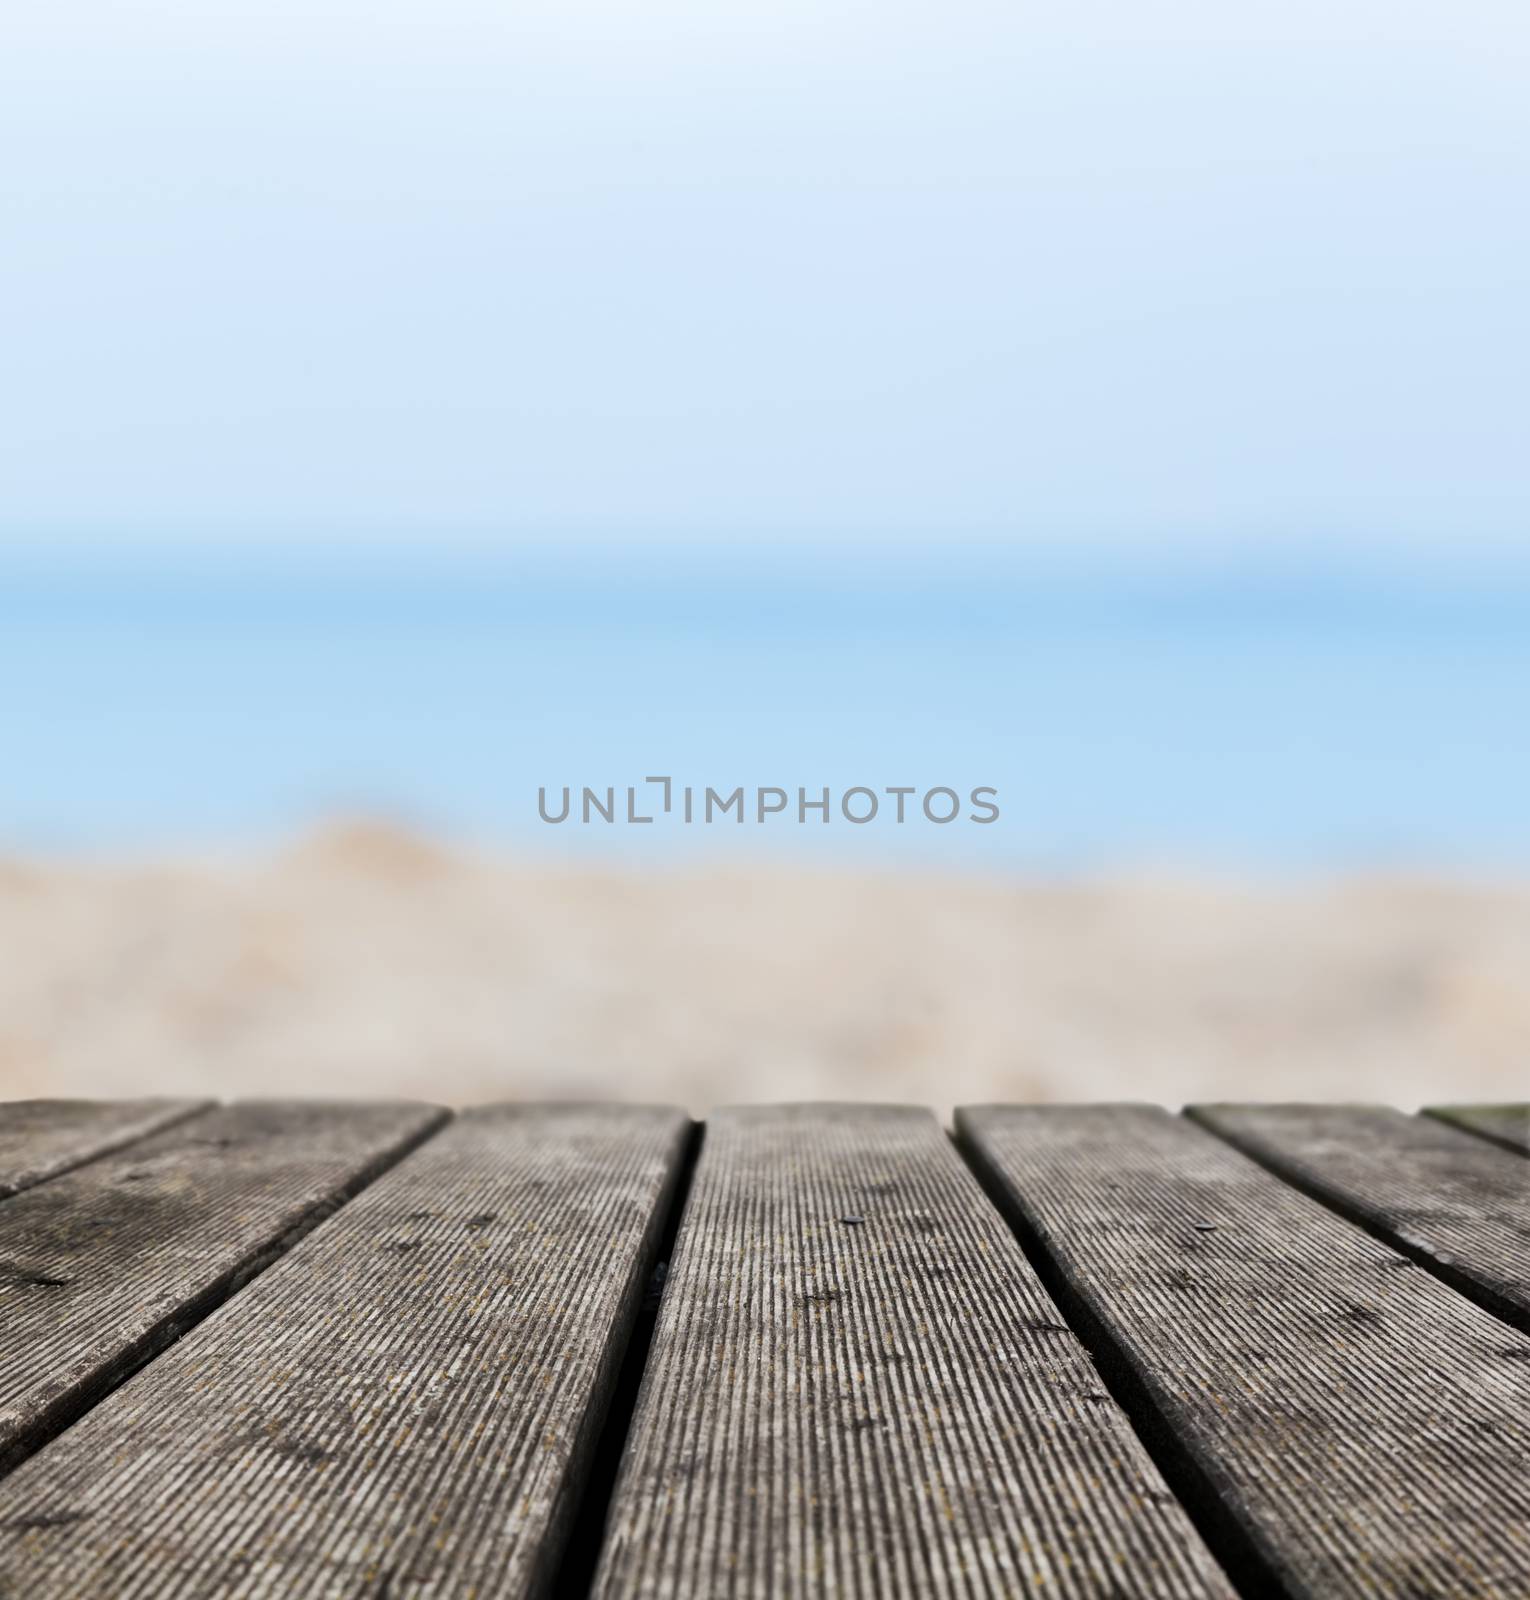 Grunge rustic real wood boards on the beach shore, ocean background. Place for an object.